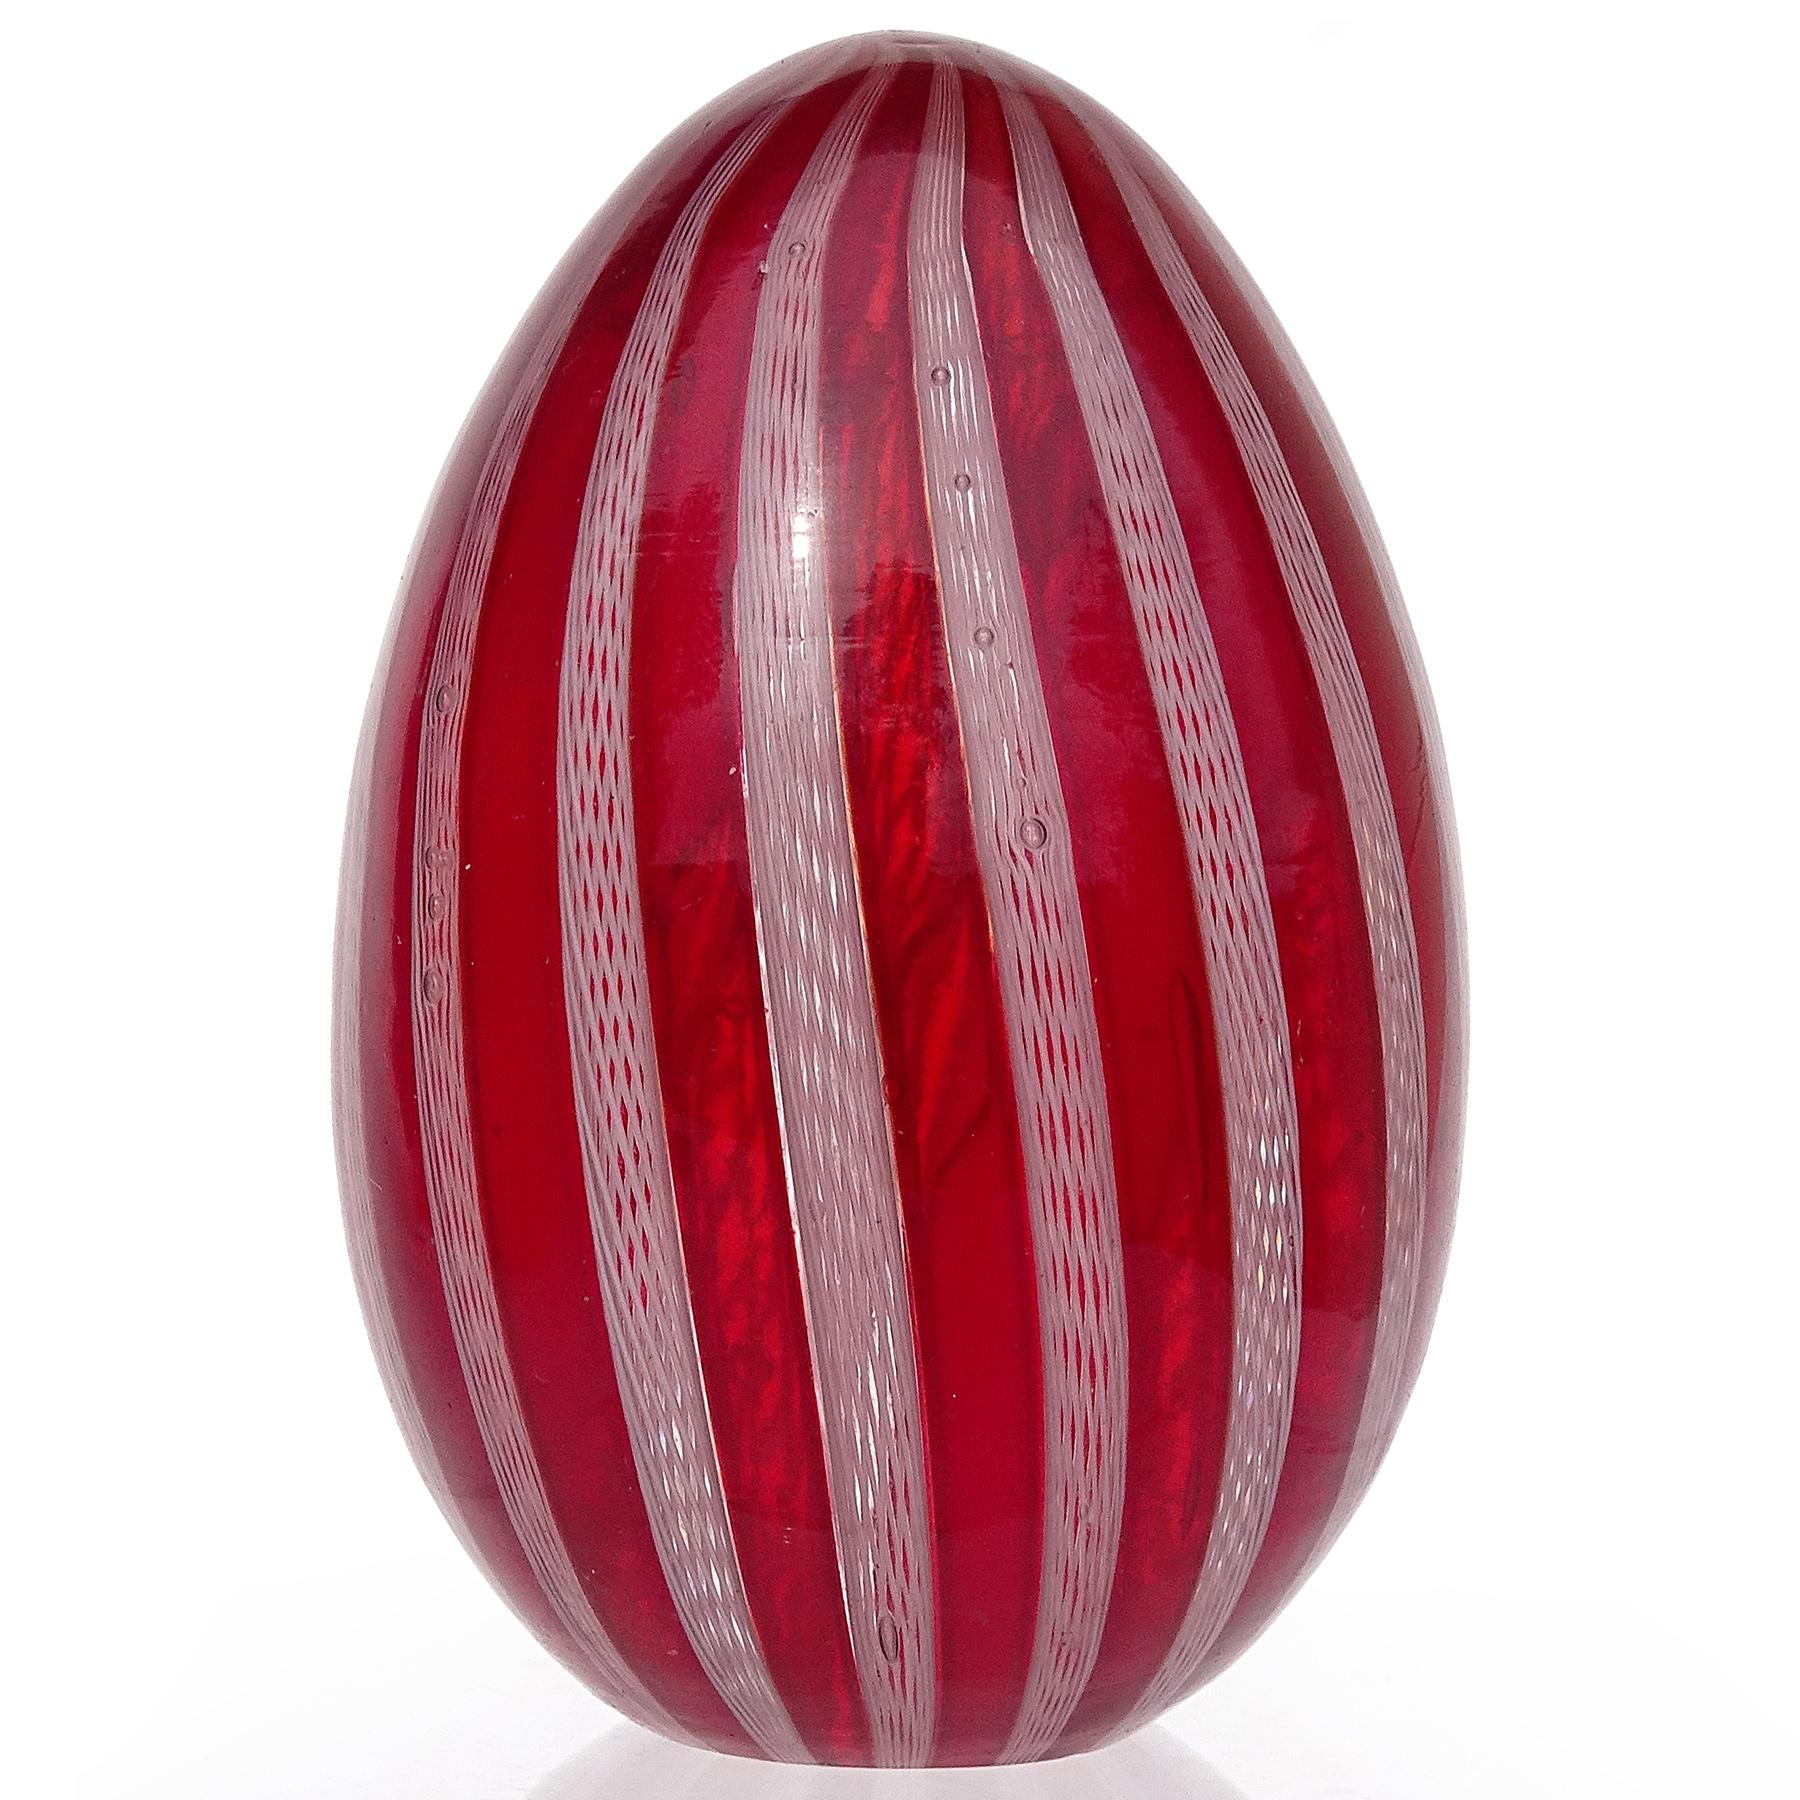 Beautiful vintage Murano hand blown red and white ribbons Italian art glass egg shaped paperweight. Attributed to the Fratelli Toso company. The paperweight is made with deep red 